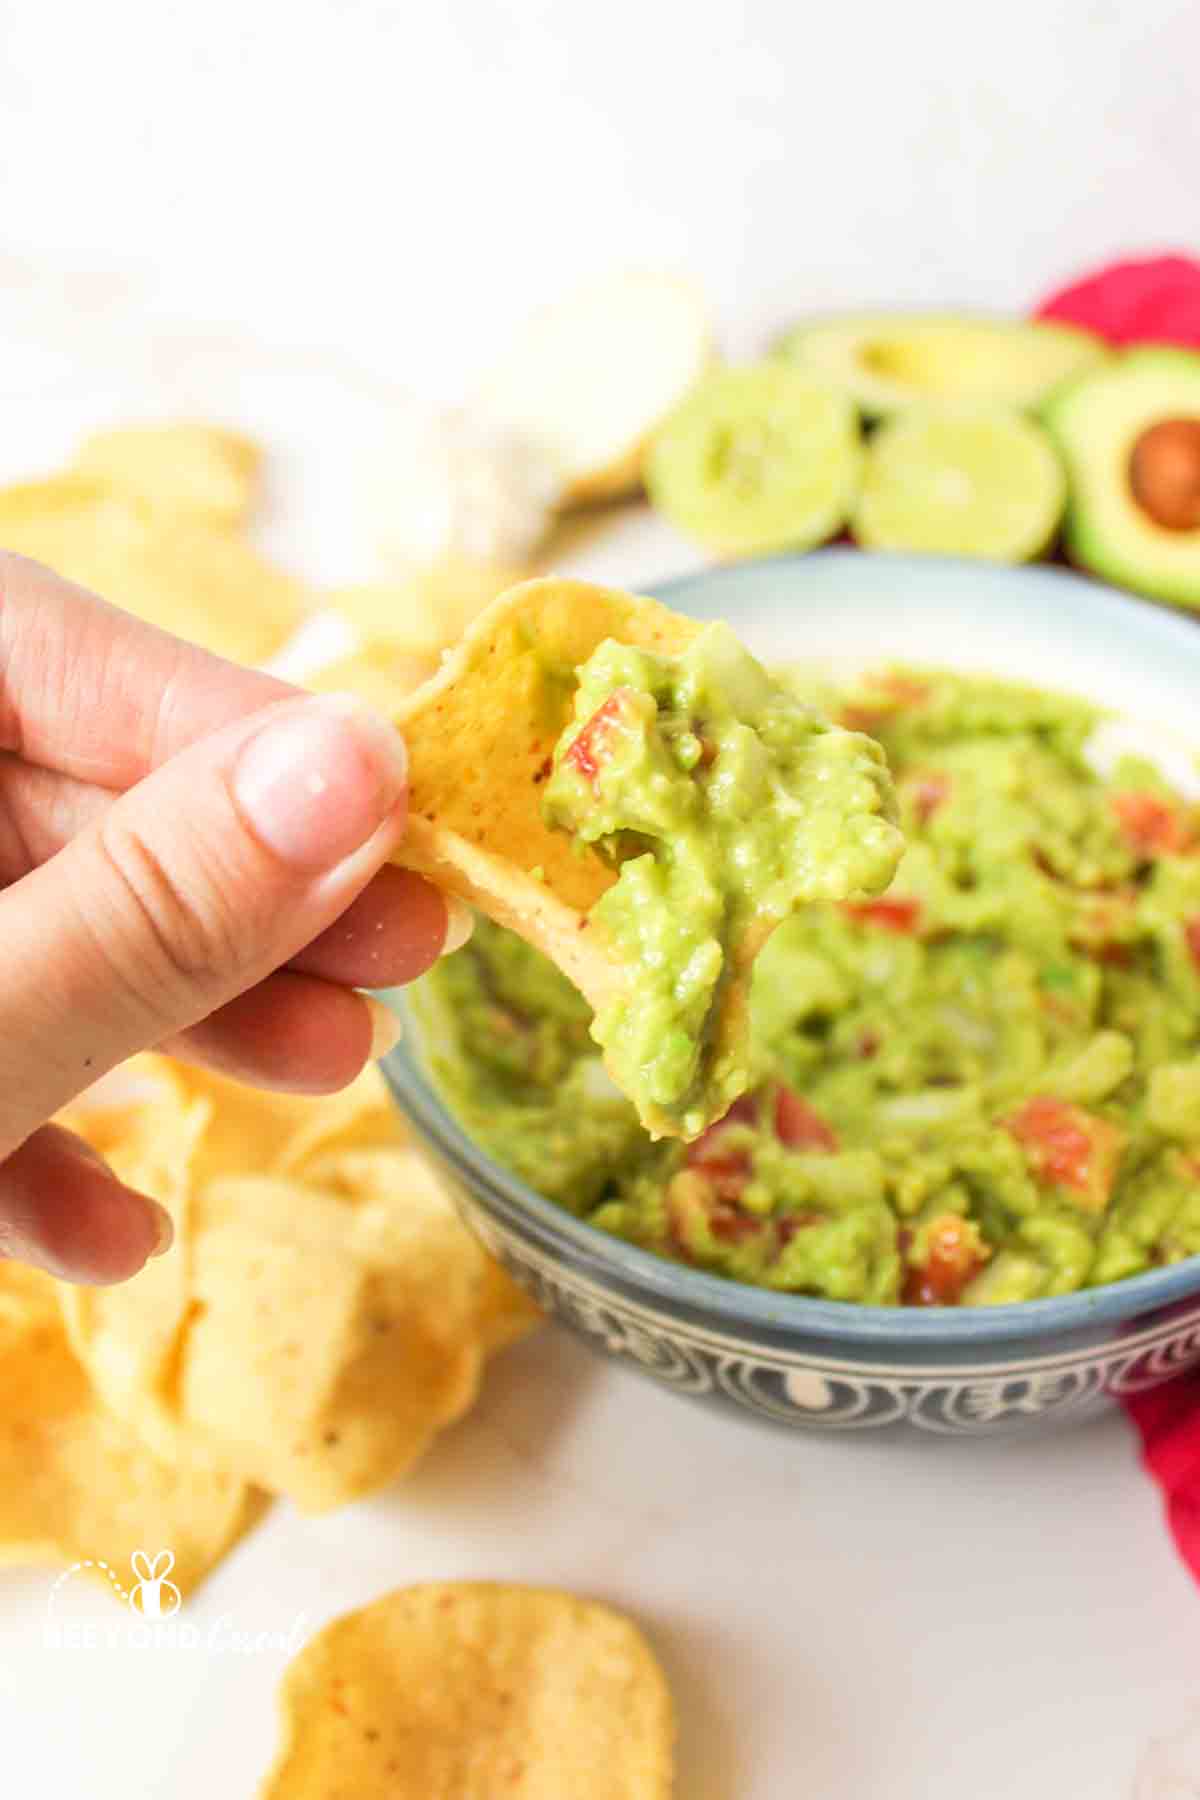 a hand holding up a tortilla chip with a scoop of guacamole on it